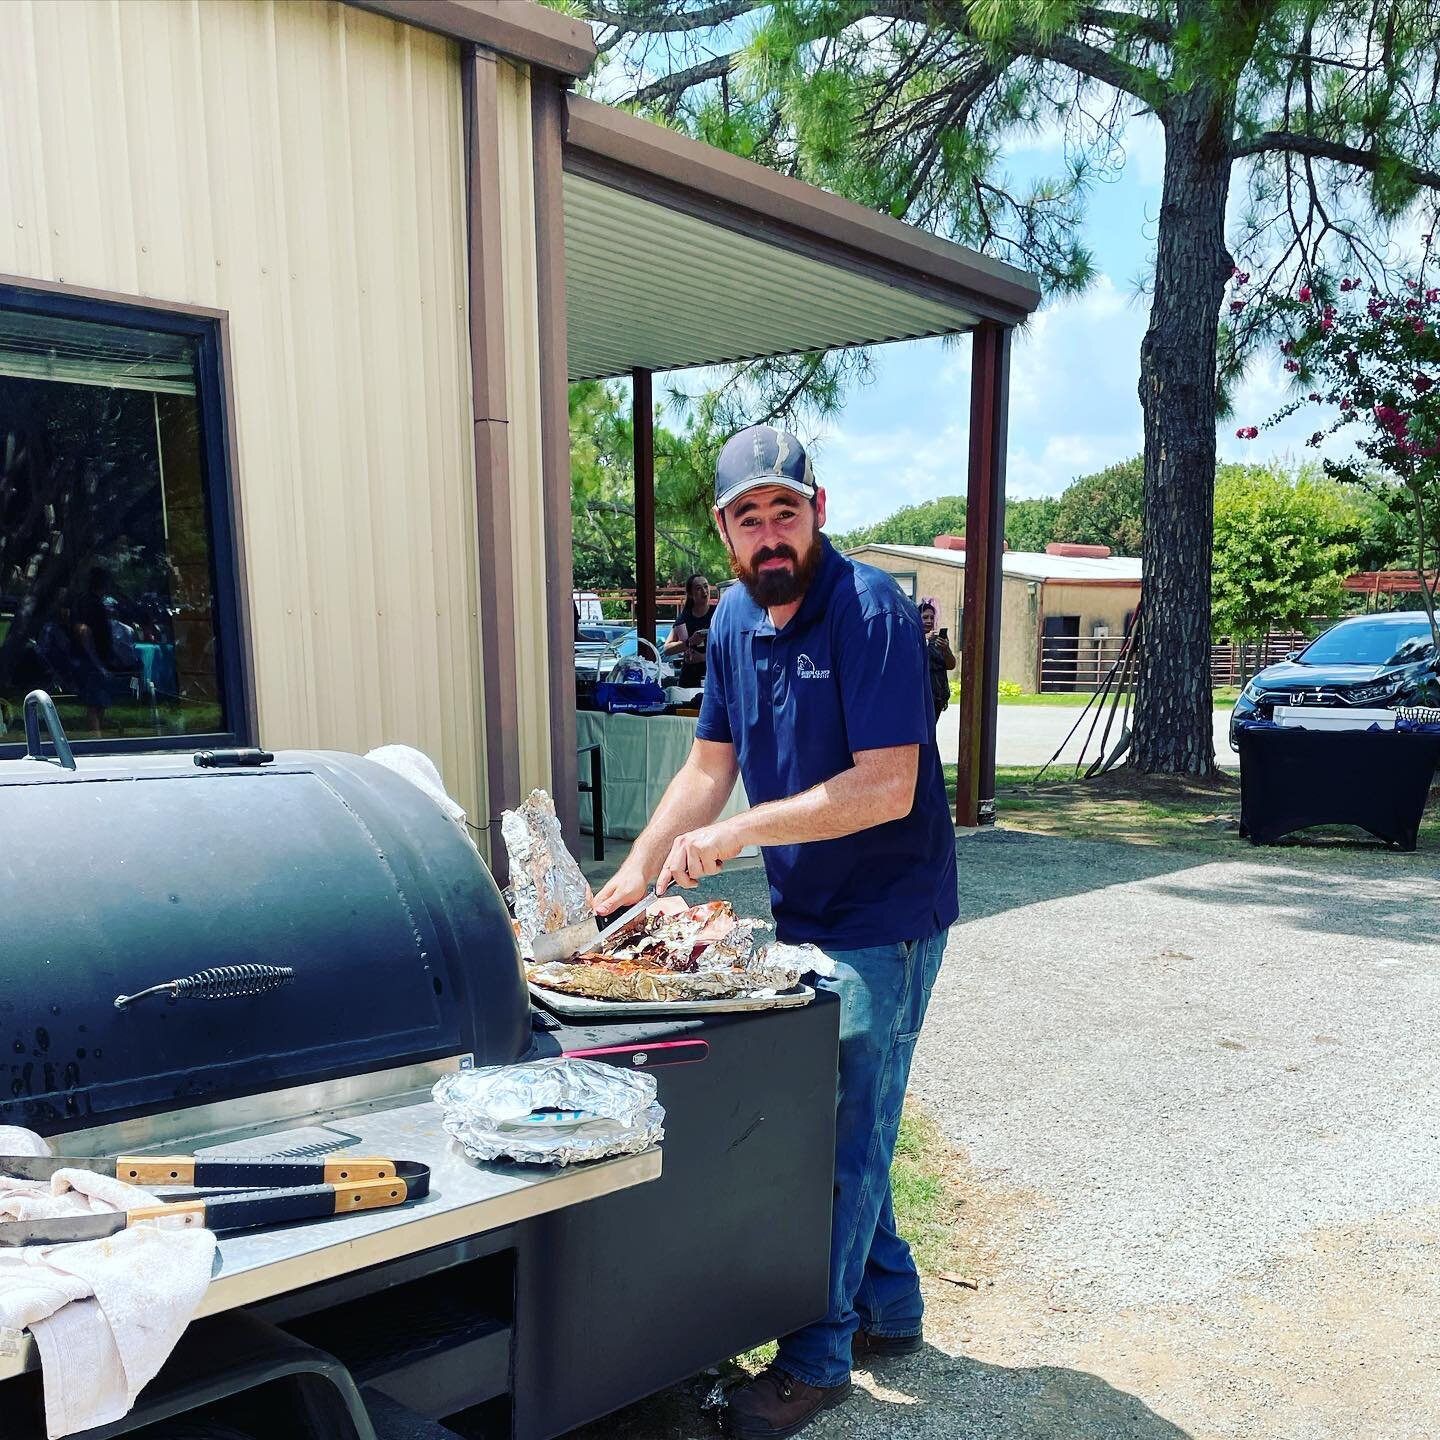 We had the most incredible Saturday with all of our barn friends and family. We all got together to celebrate the end of summer and say Good Bye to Ms Debbie. 
We want to say a huge thank you to Brandon Green for putting together such a huge feast an